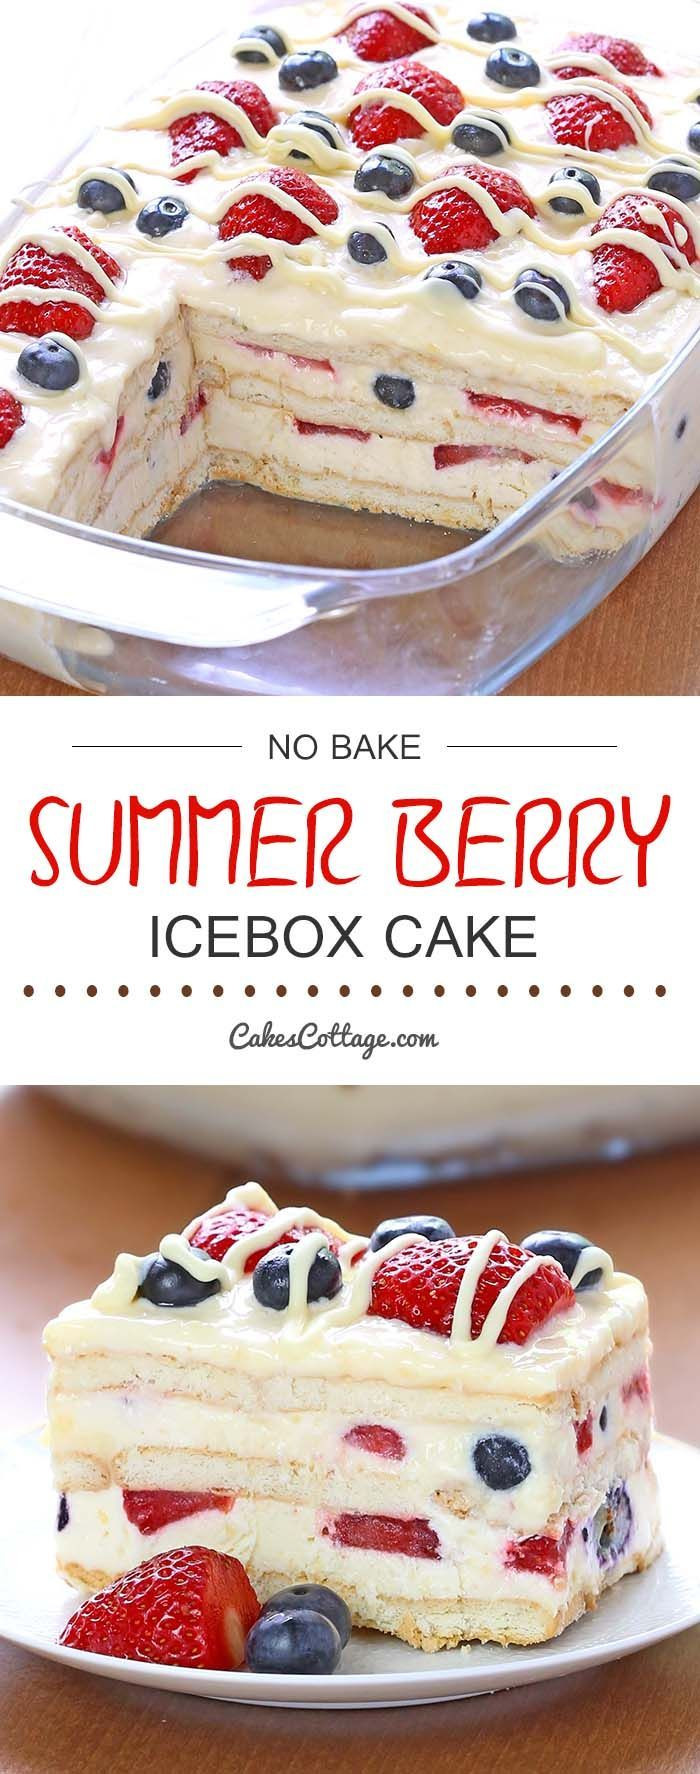 Quick And Easy Summer Desserts
 No Bake Summer Berry Icebox Cake Recipe